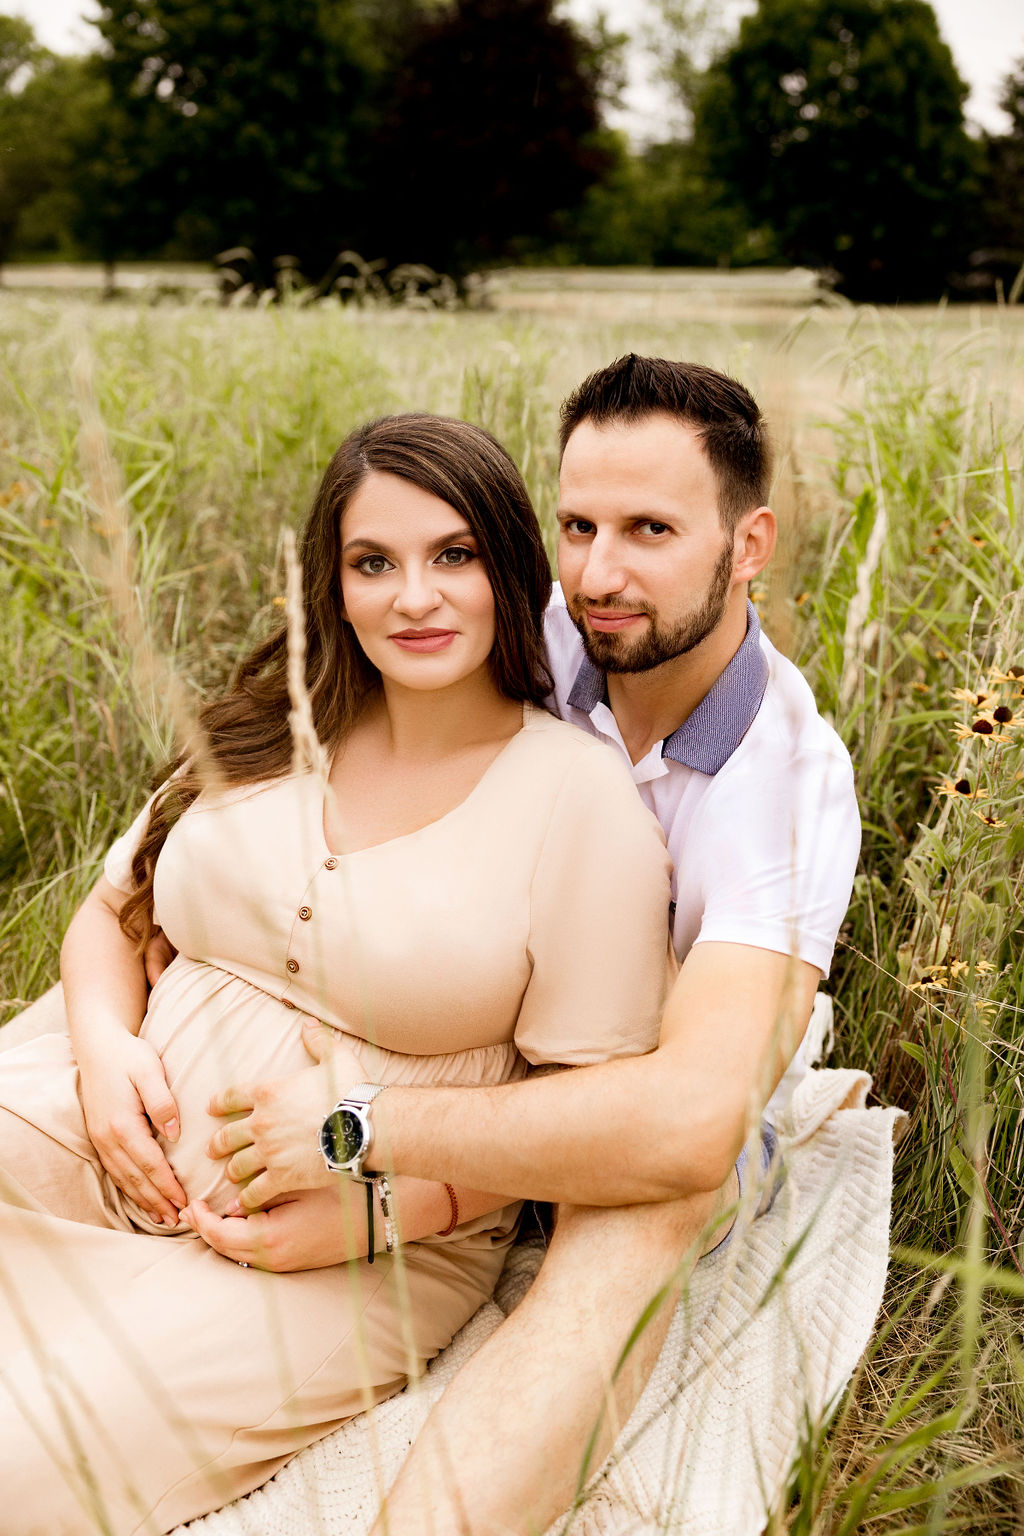 Expecting parents cuddle on a picnic blanket in a field of tall grass while holding the bump after visiting women's care center milwaukee